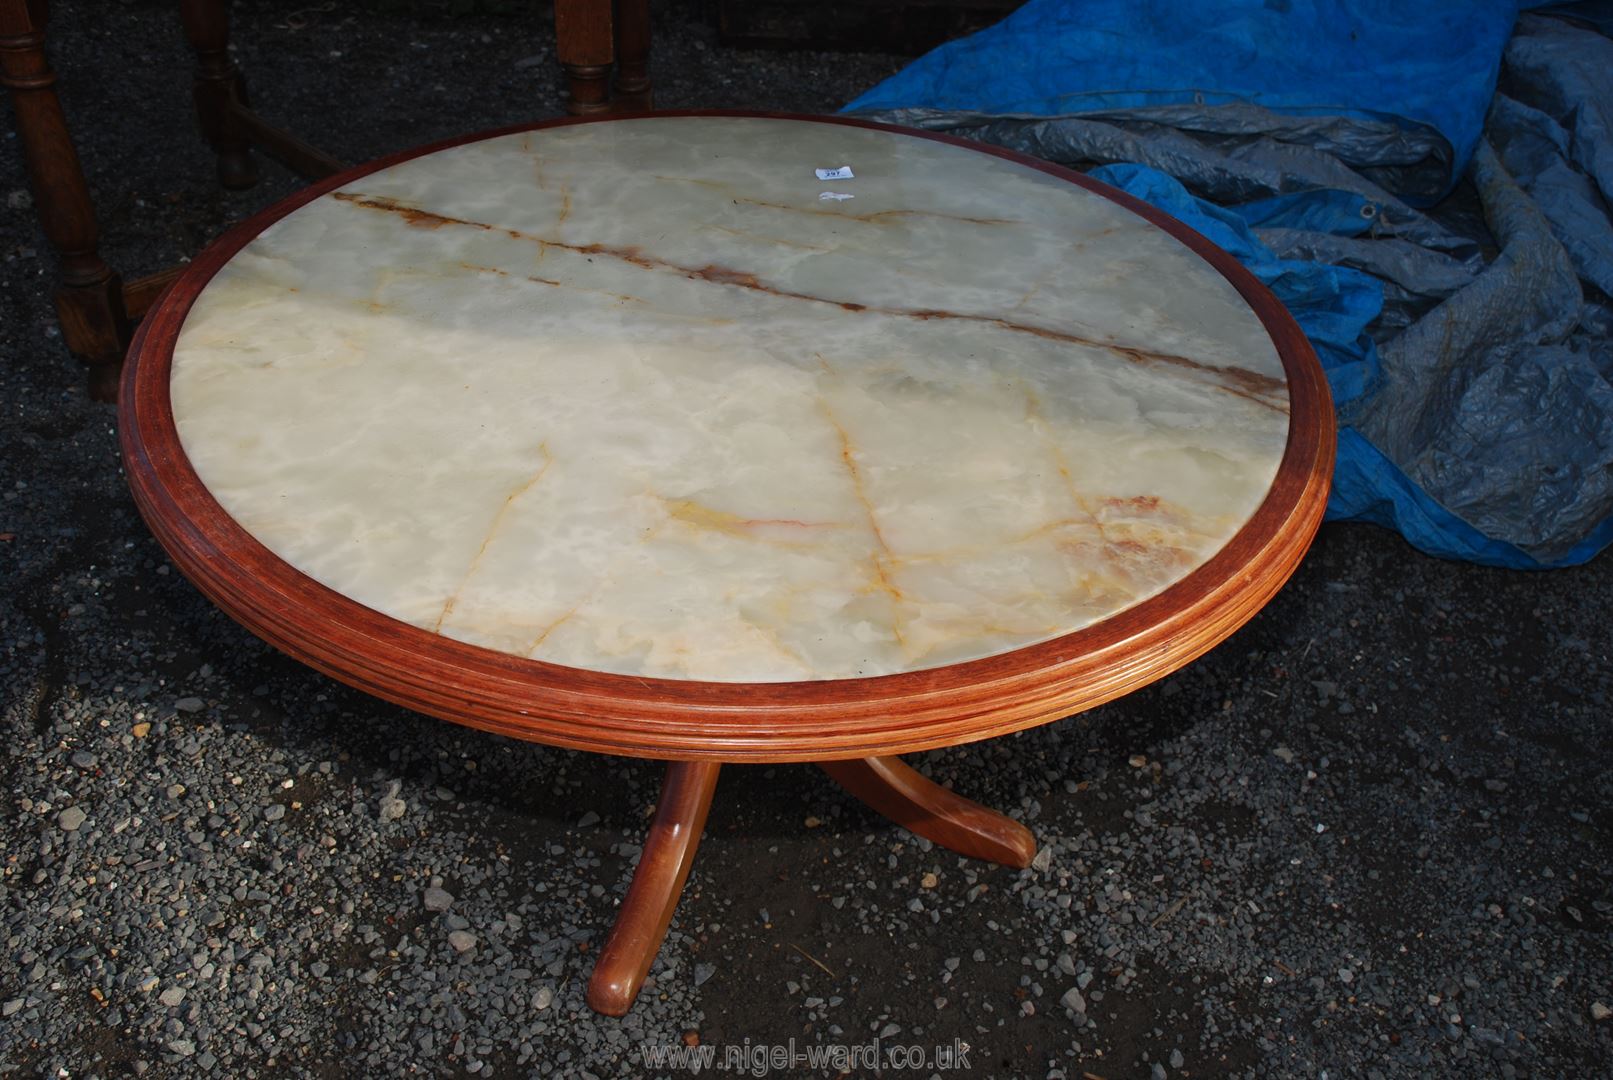 A low circular coffee table with onyx top, 41" diameter x 22" high.